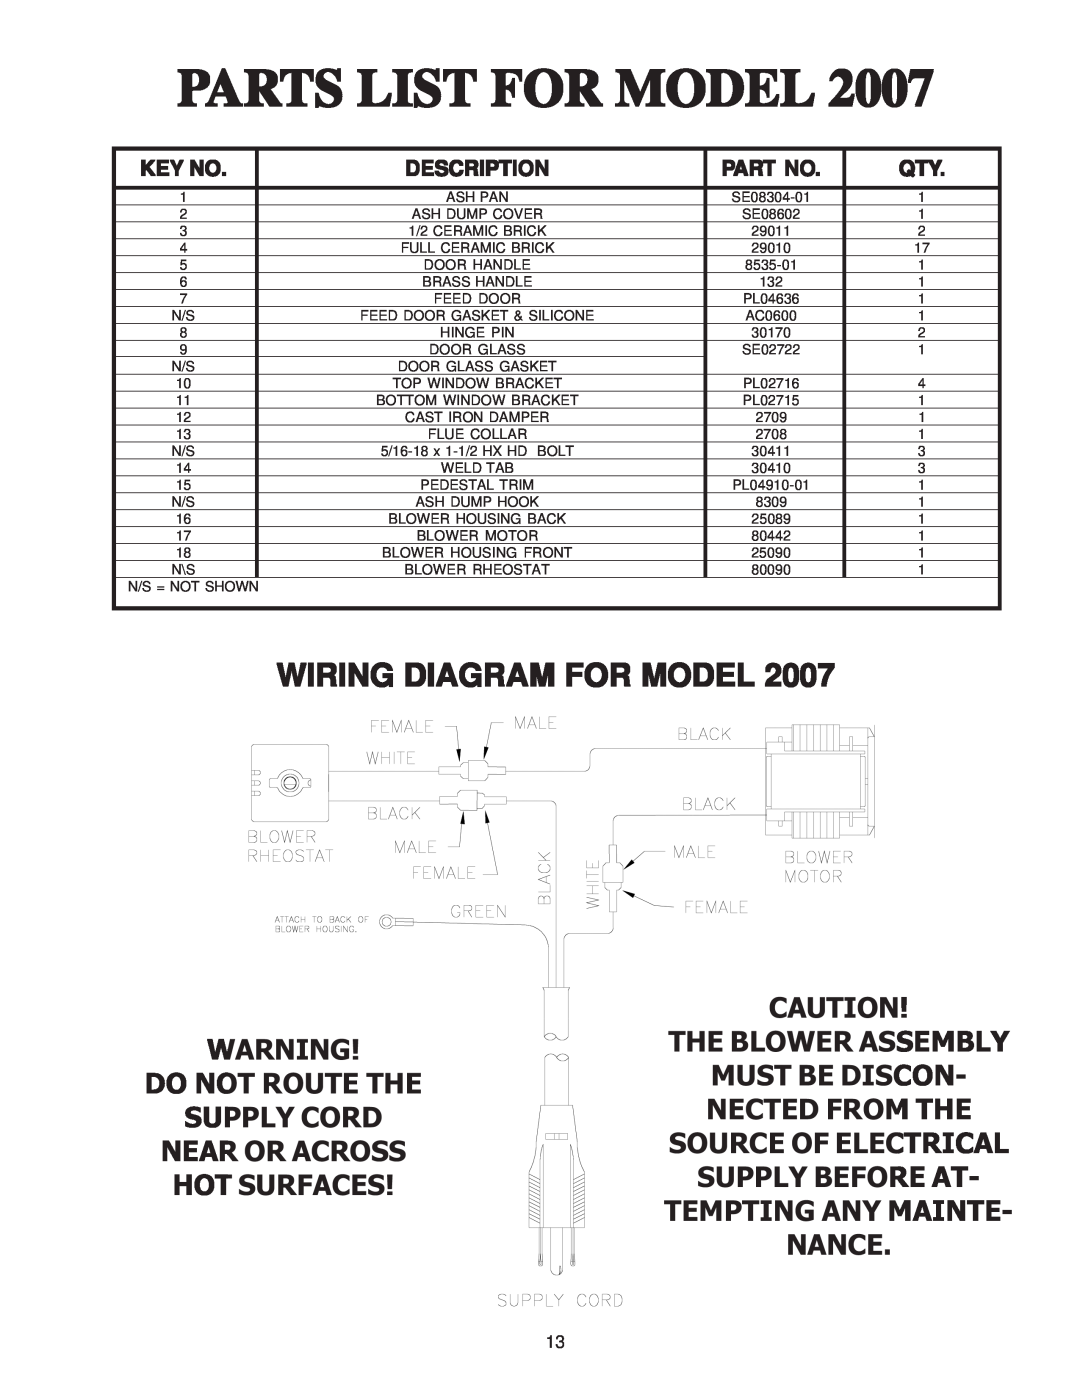 United States Stove 2007 owner manual Wiring Diagram For Model, Parts List For Model 